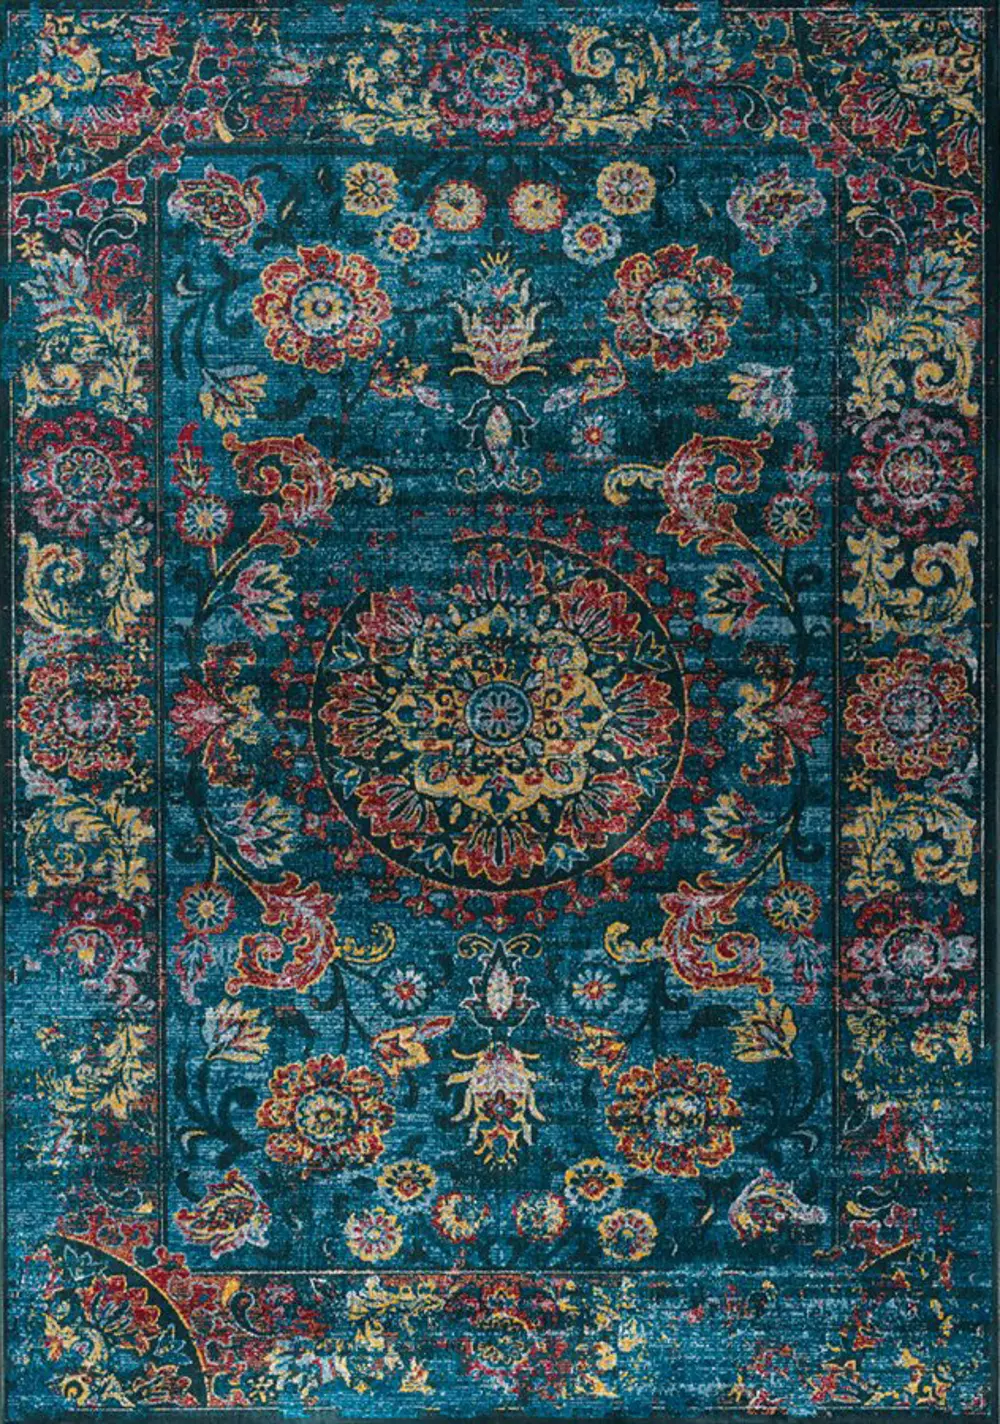 Antika 5 x 8 Vintage Teal Blue and Red Area Rug-1